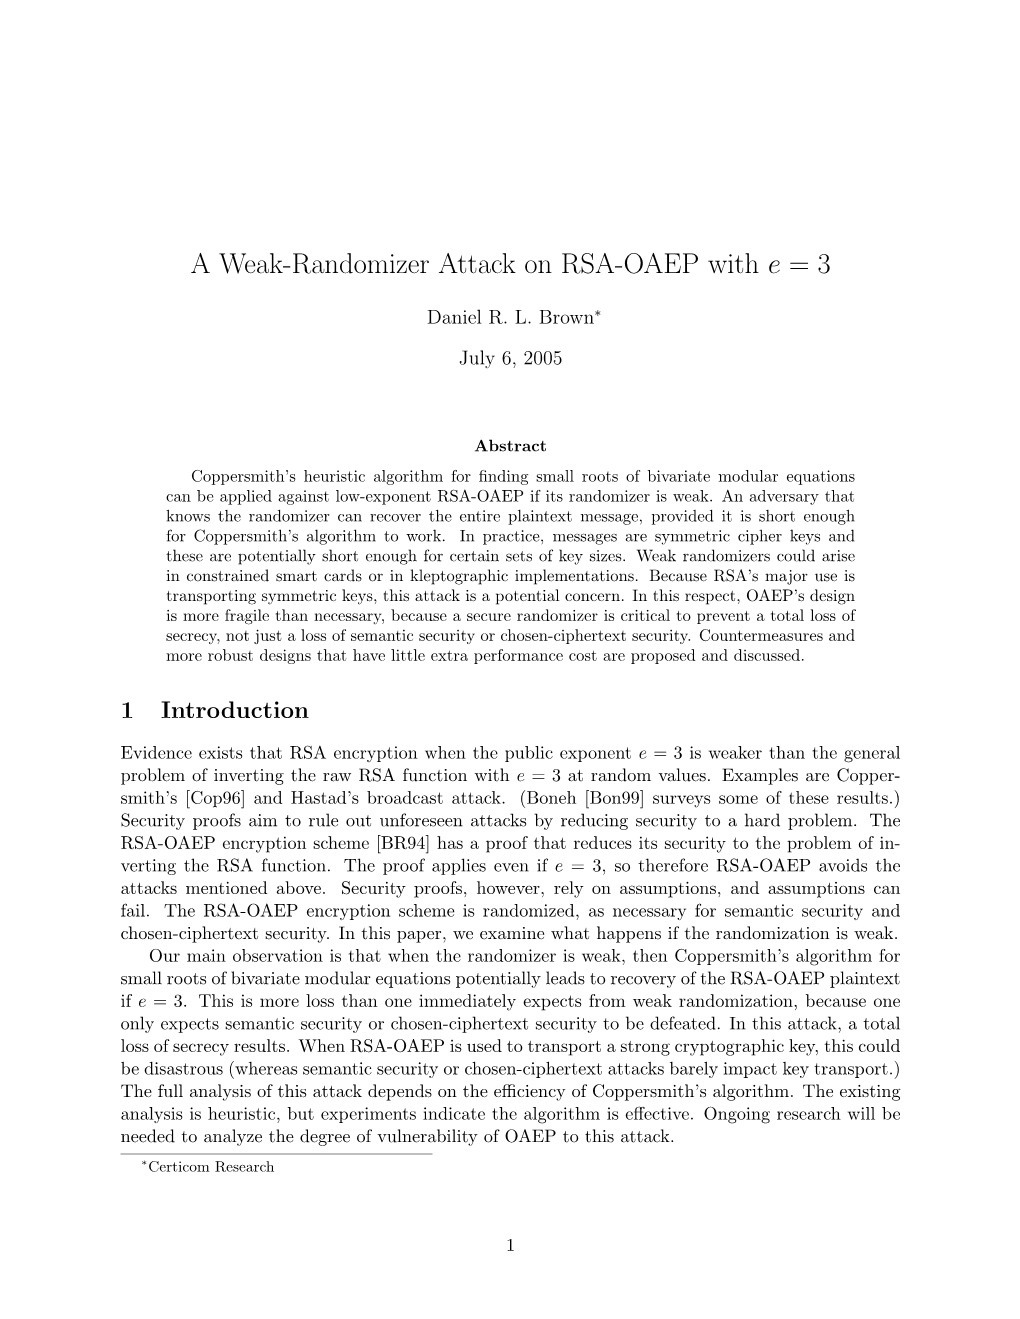 A Weak-Randomizer Attack on RSA-OAEP with E = 3